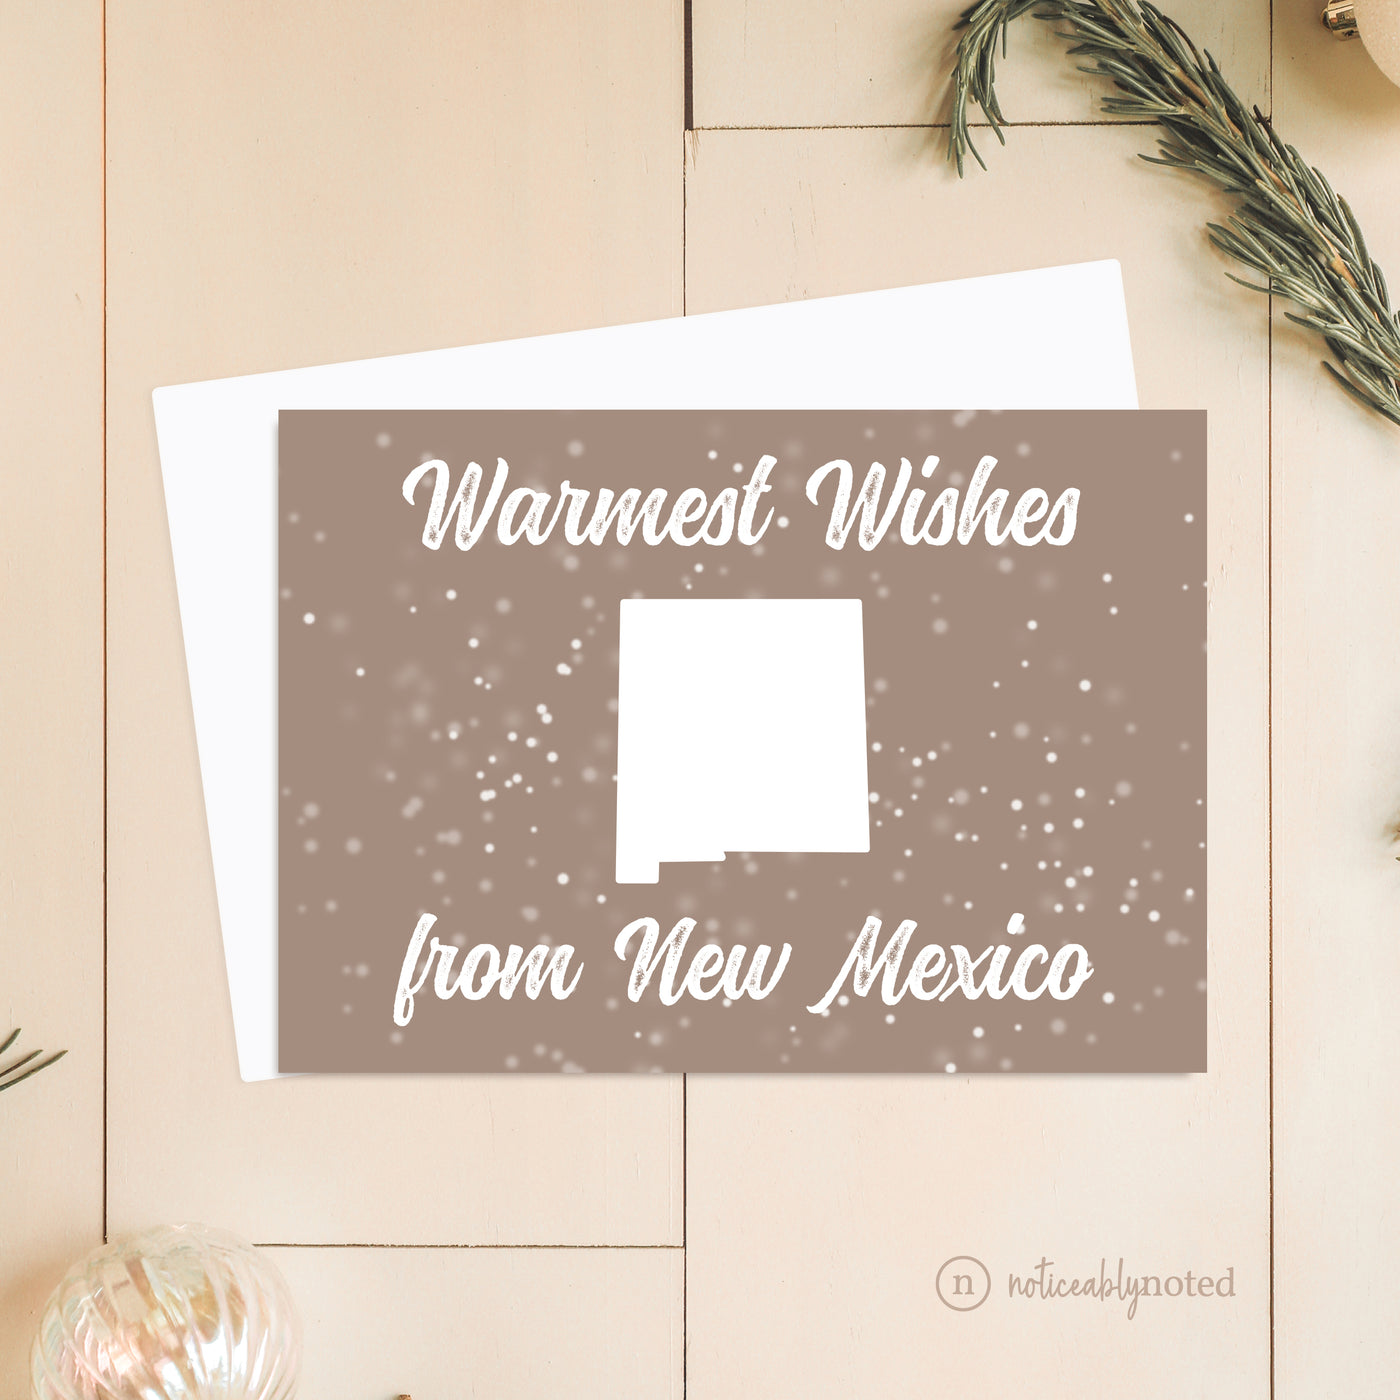 NM Christmas Card | Noticeably Noted